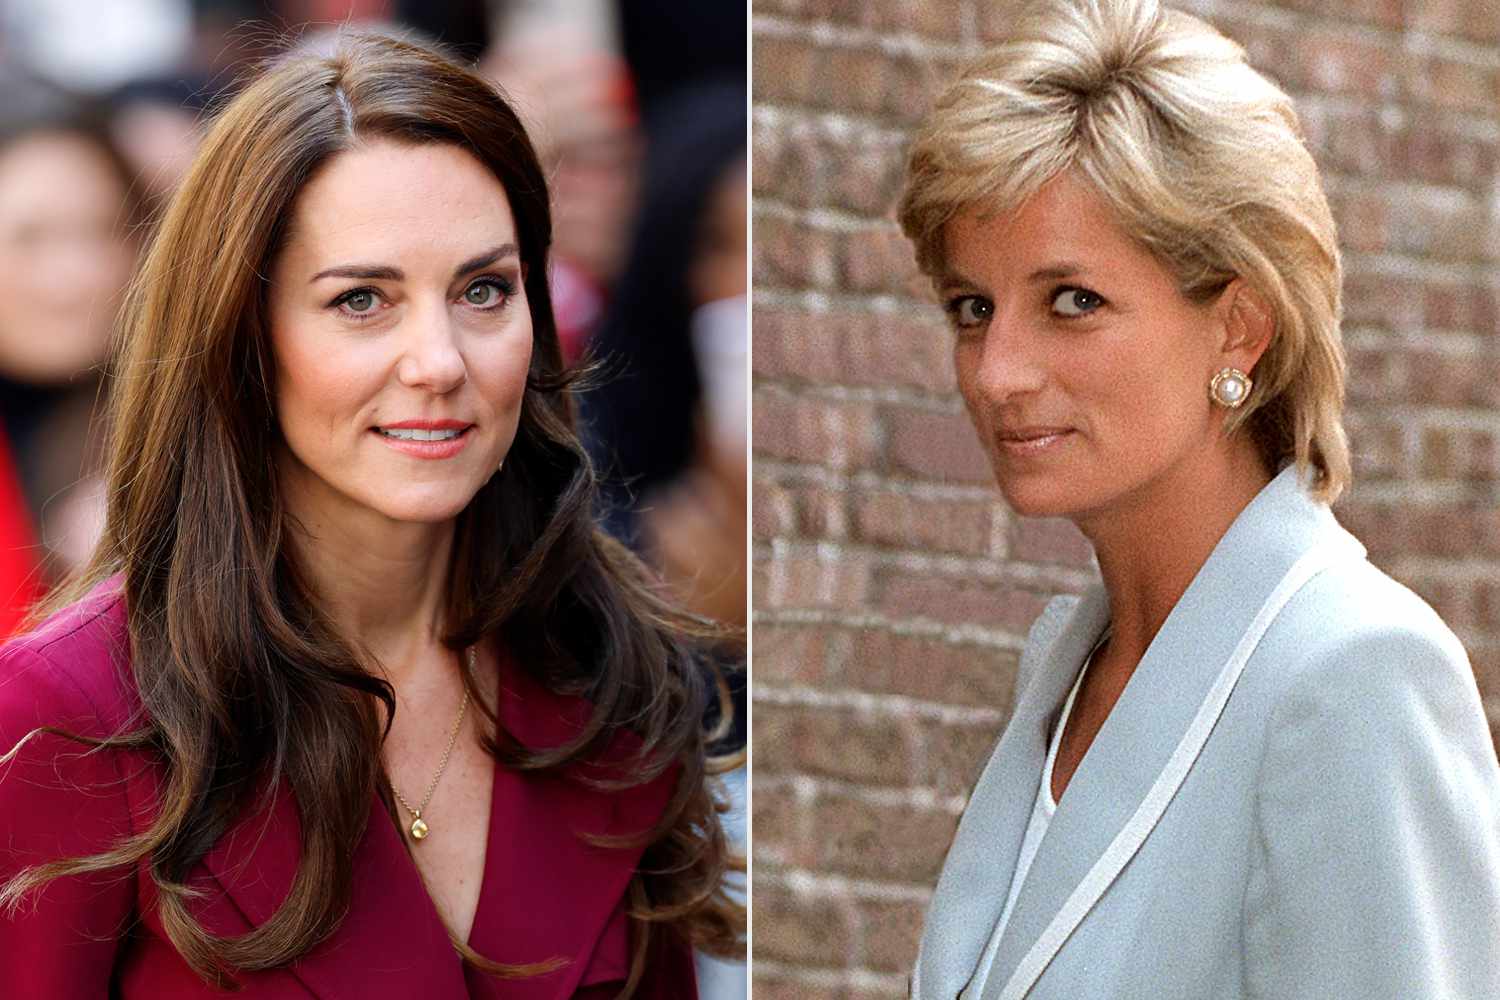 Kate Middleton Debated Refusing Princess of Wales Title to Avoid 'Stressful' Comparisons to Princess Diana